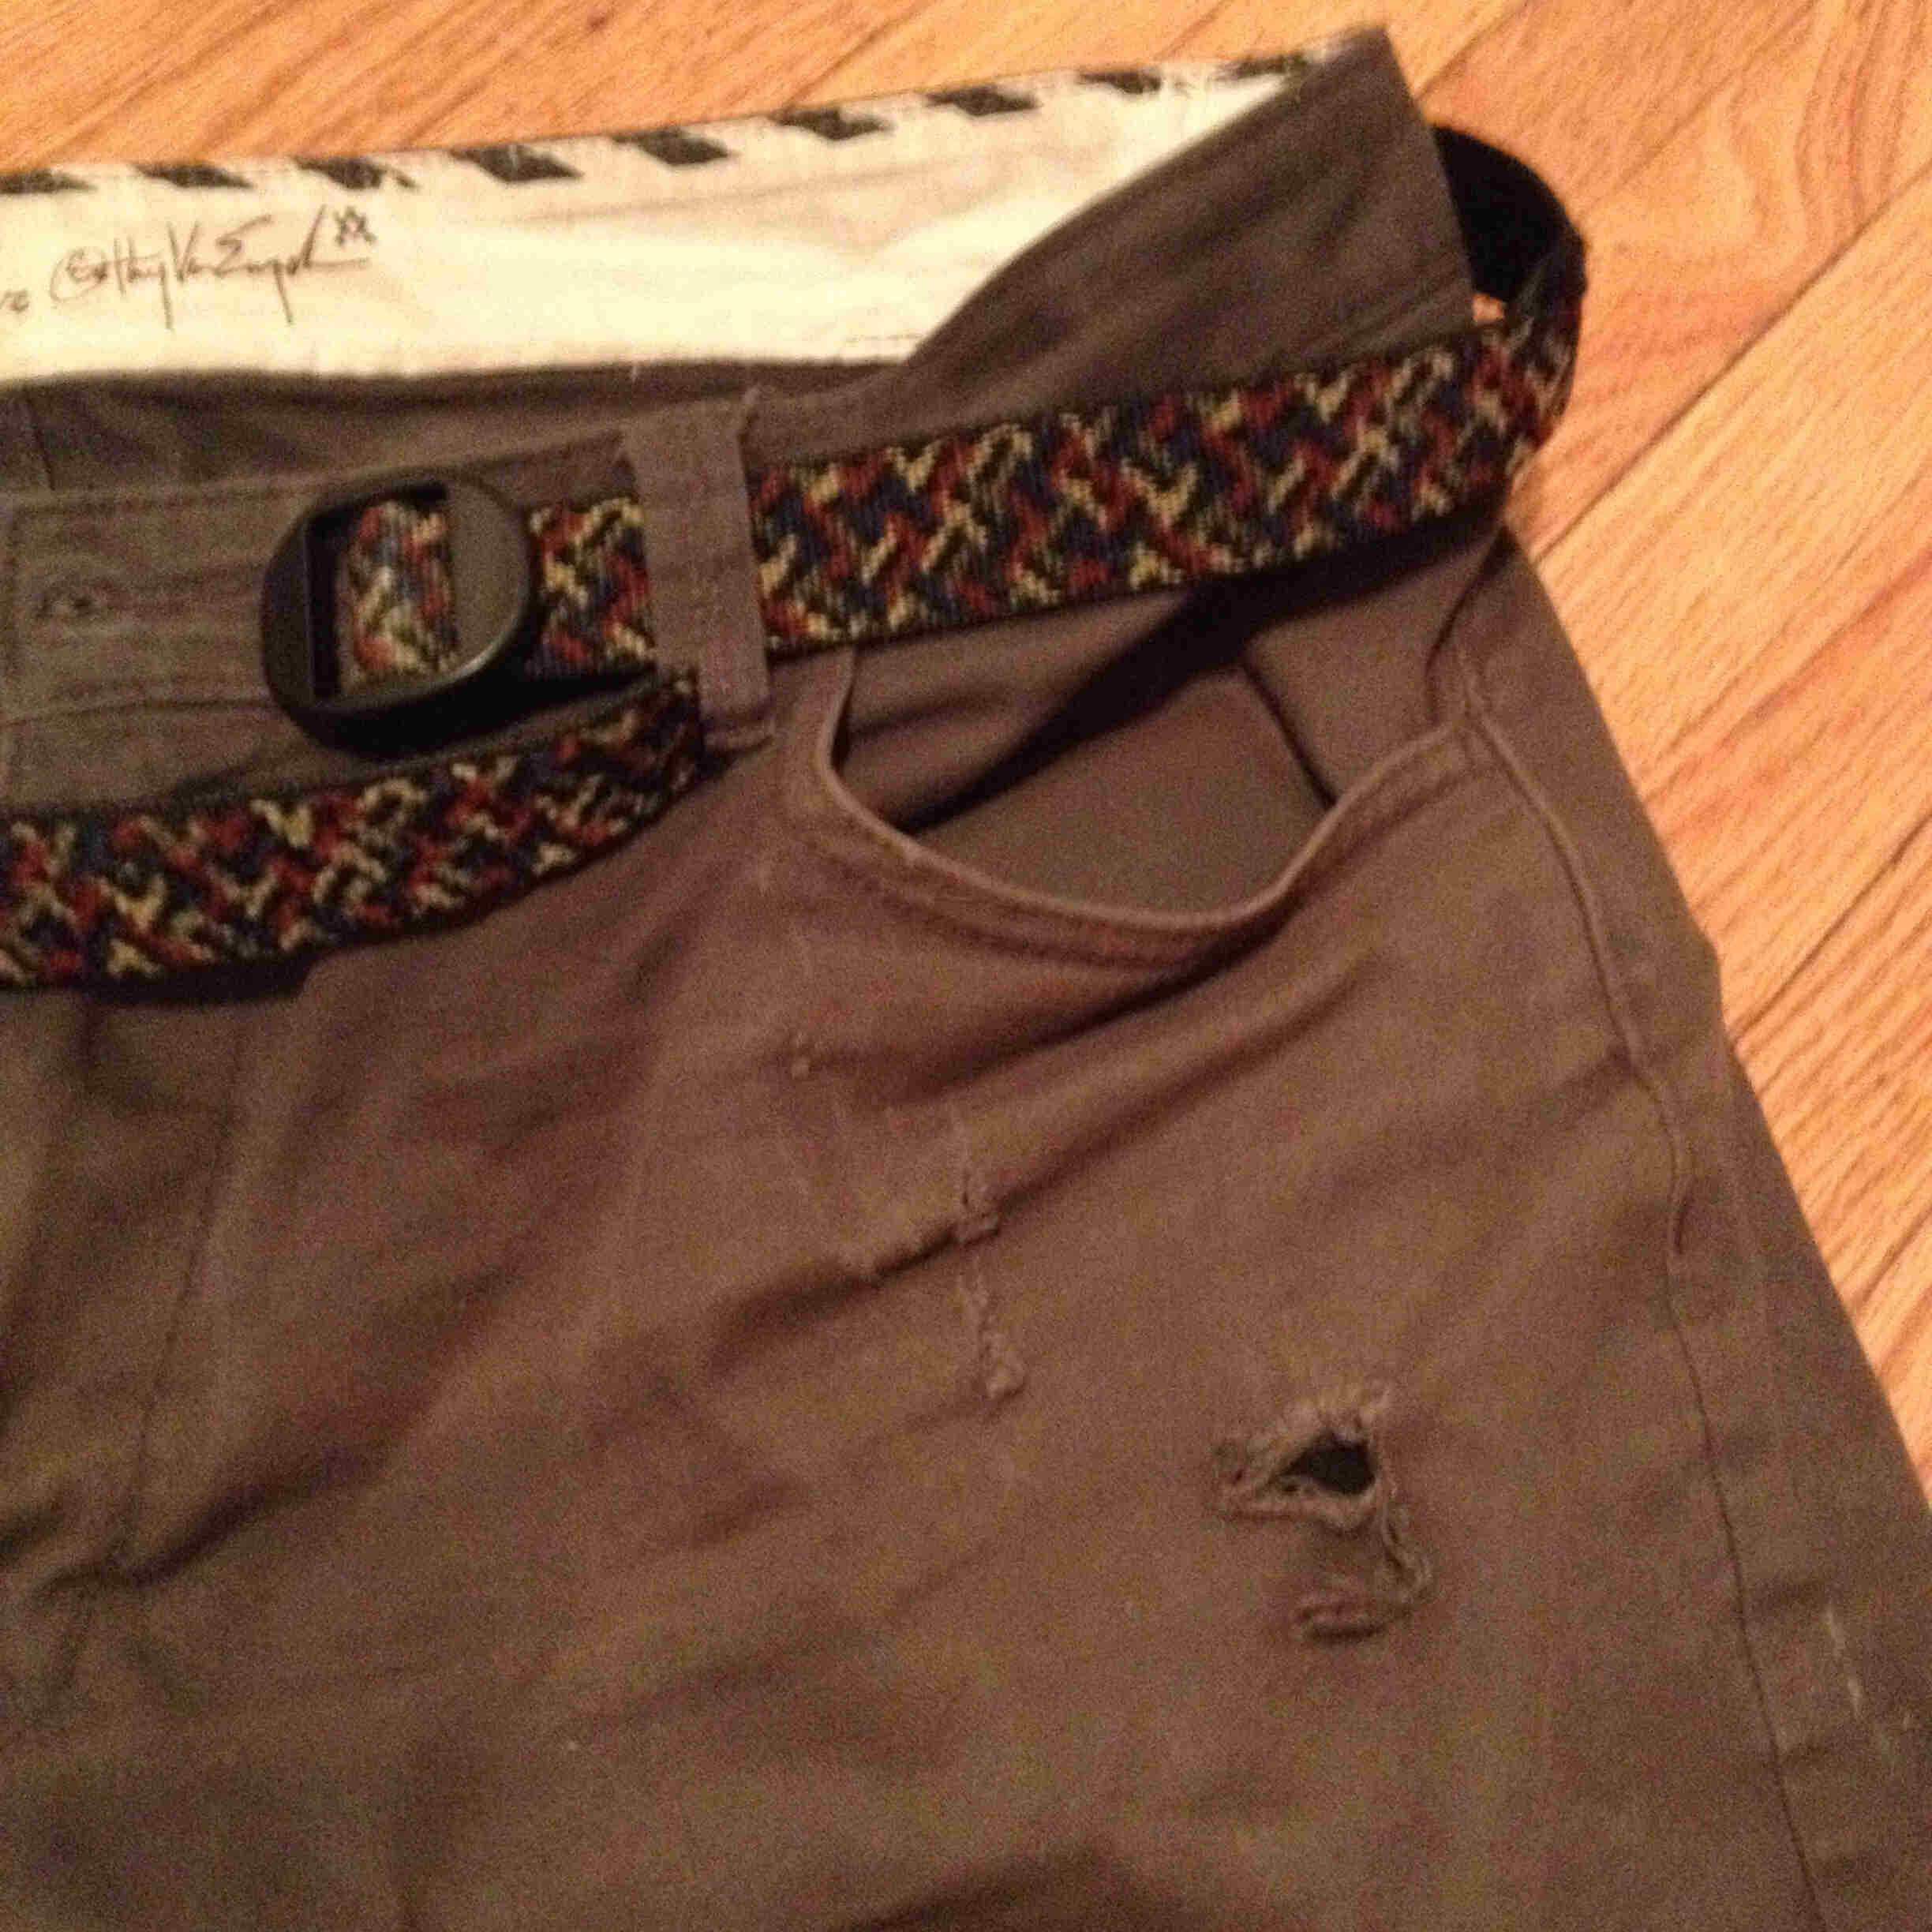 Downward, front, upper left side view of a pair of brown shorts, with a hole in the left pocket